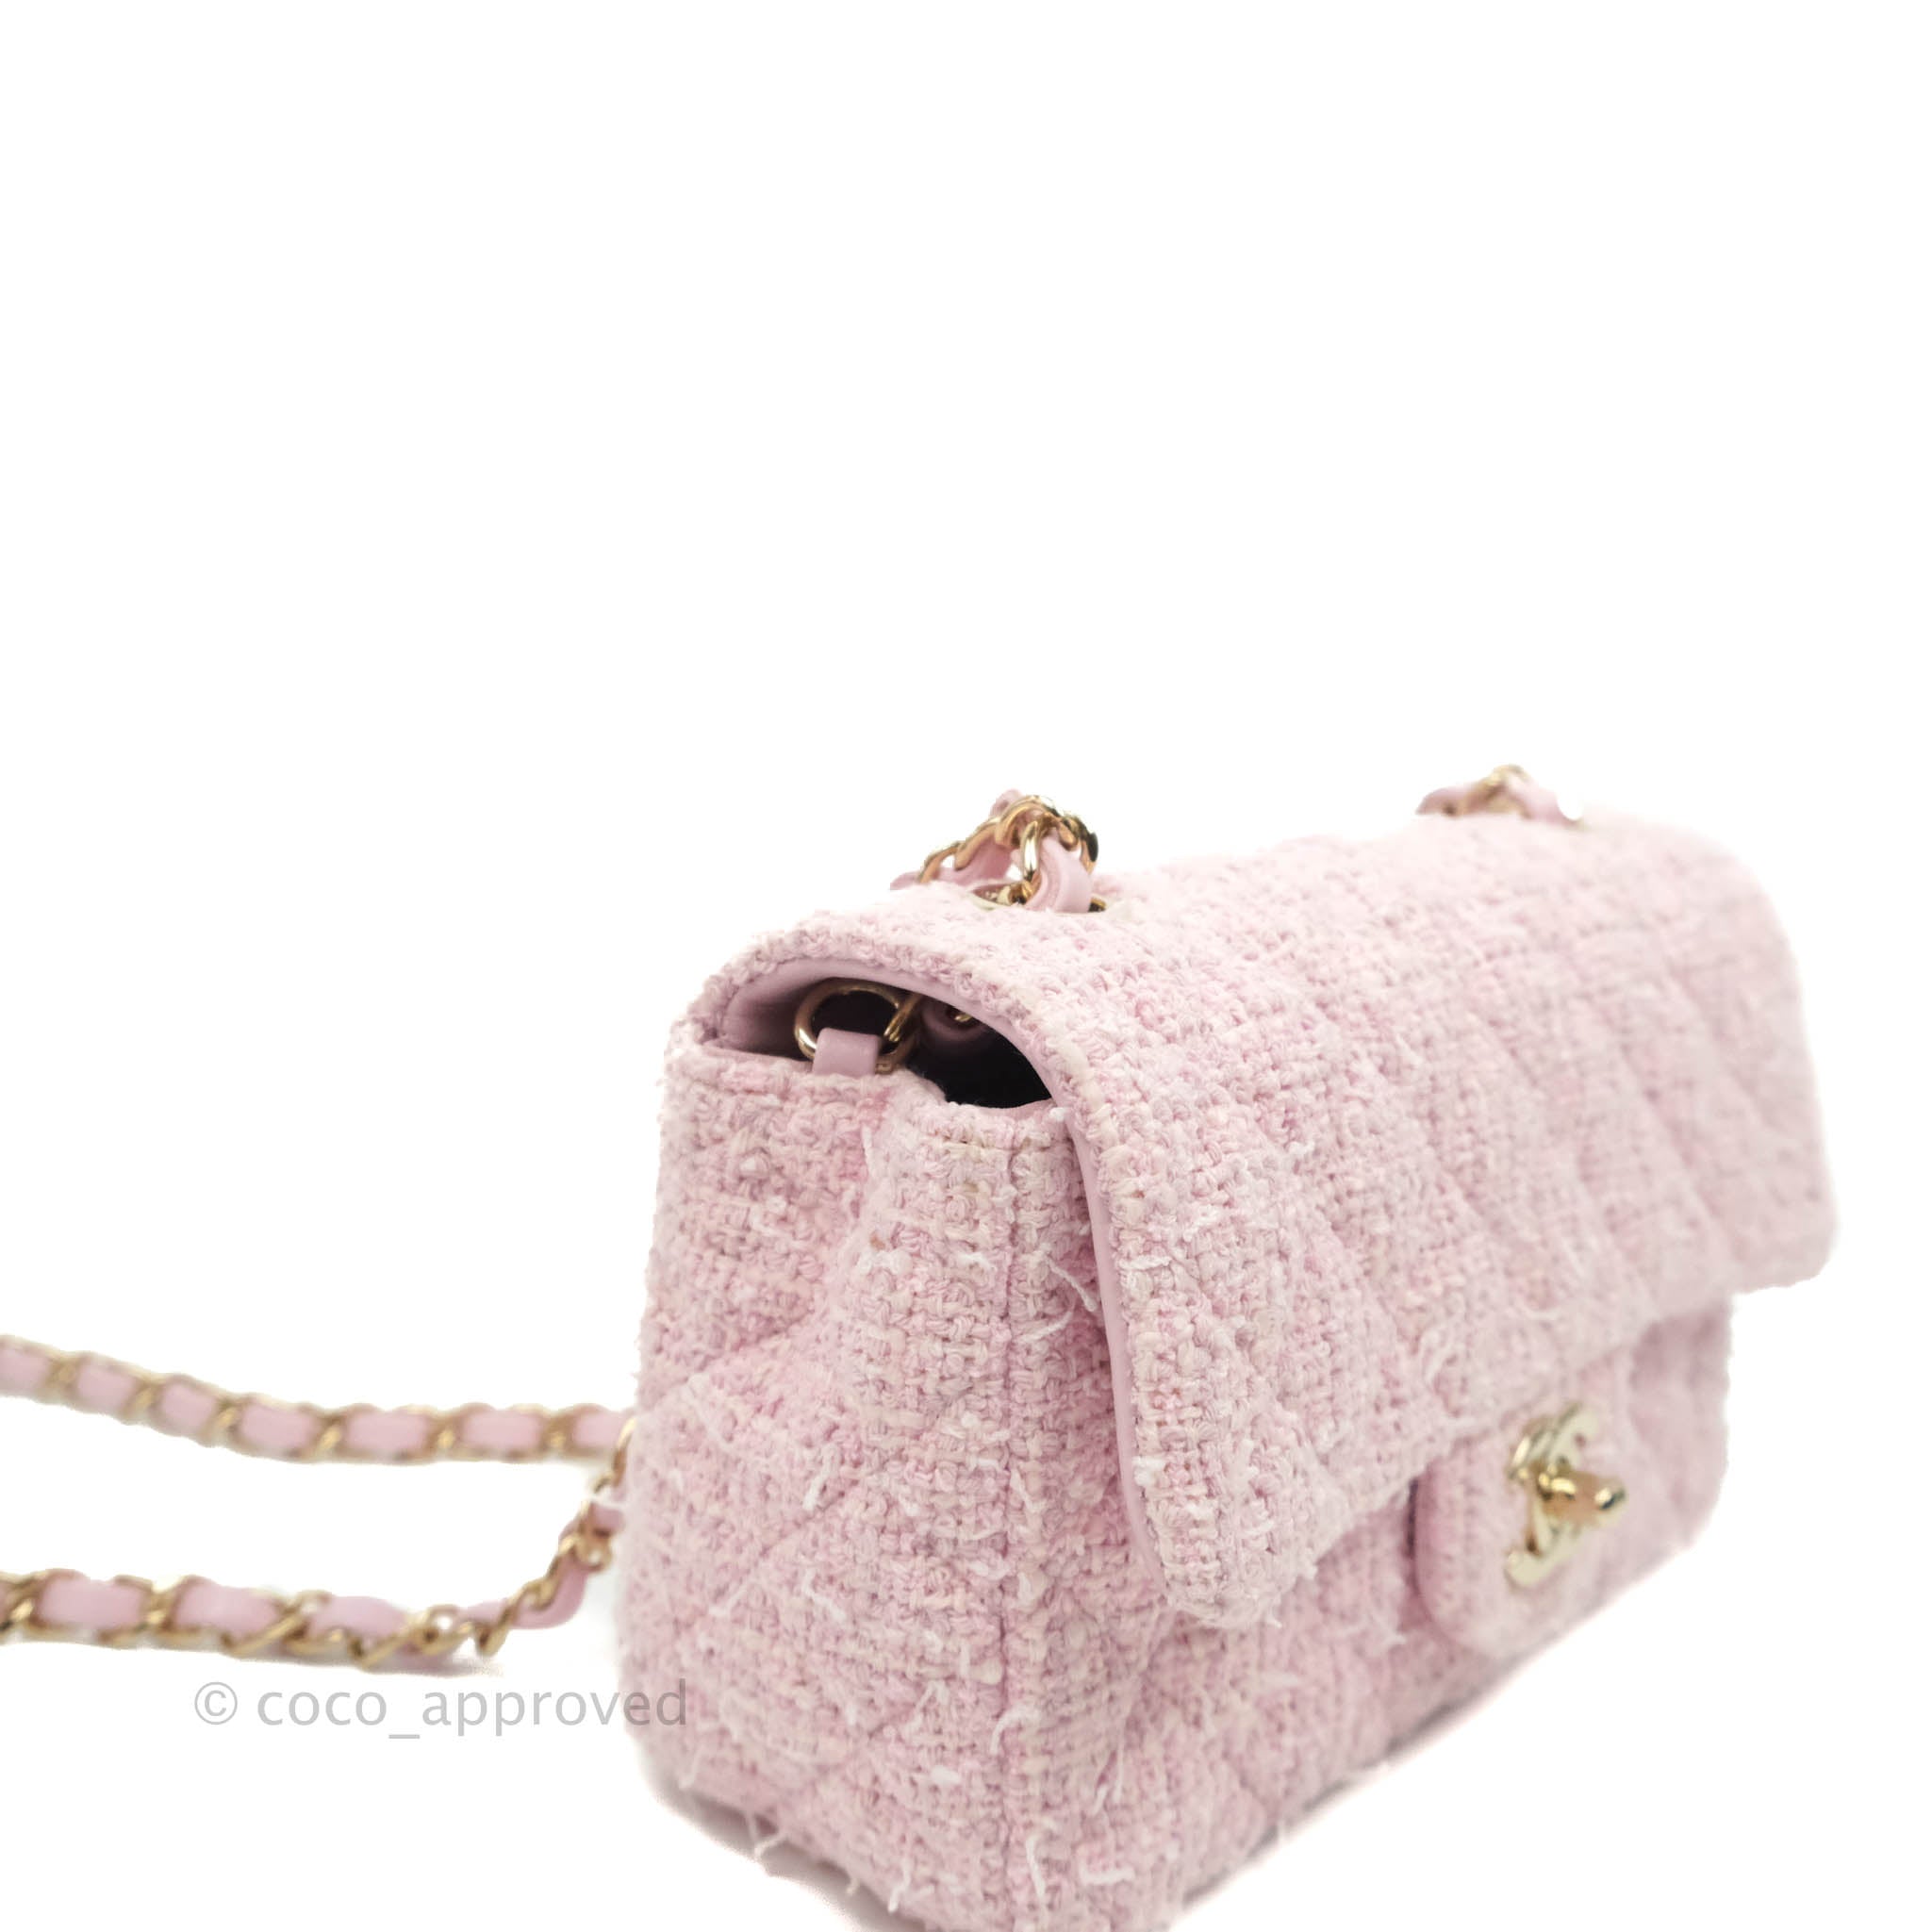 Chanel Classic Mini Rectangular, Pink Tweed with Gold Hardware, New in Box  MA001